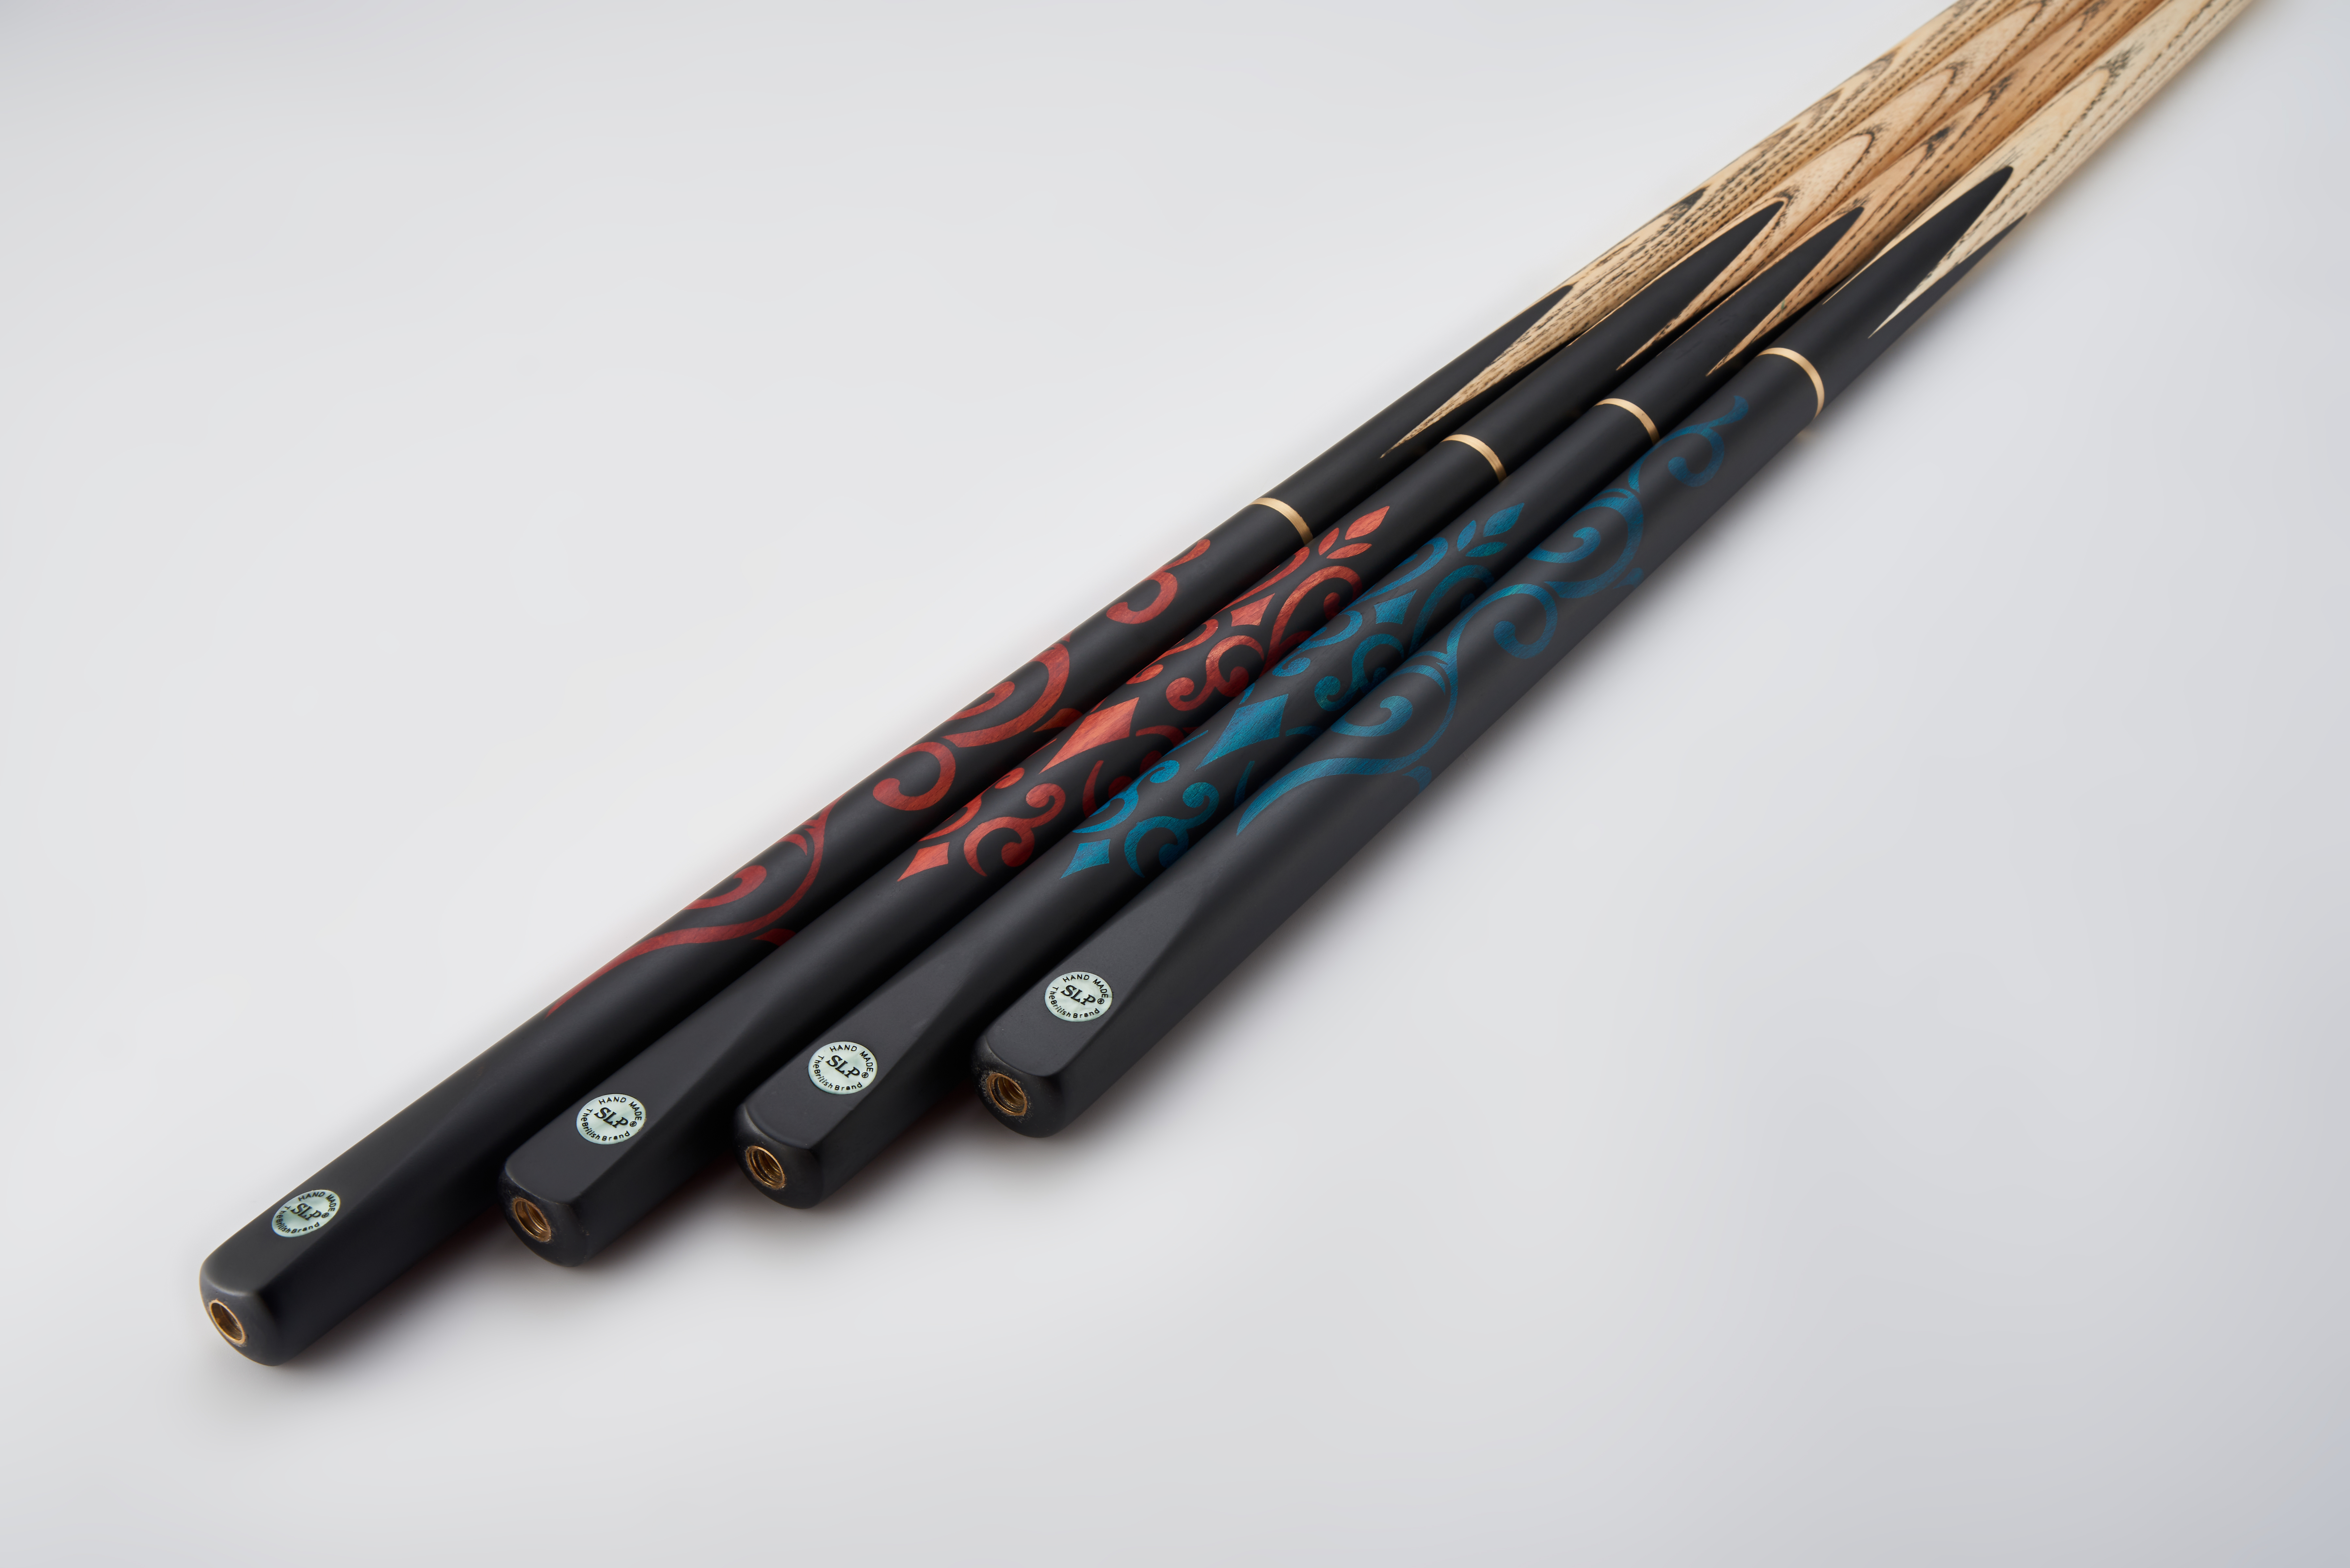 best cue stick for snooker